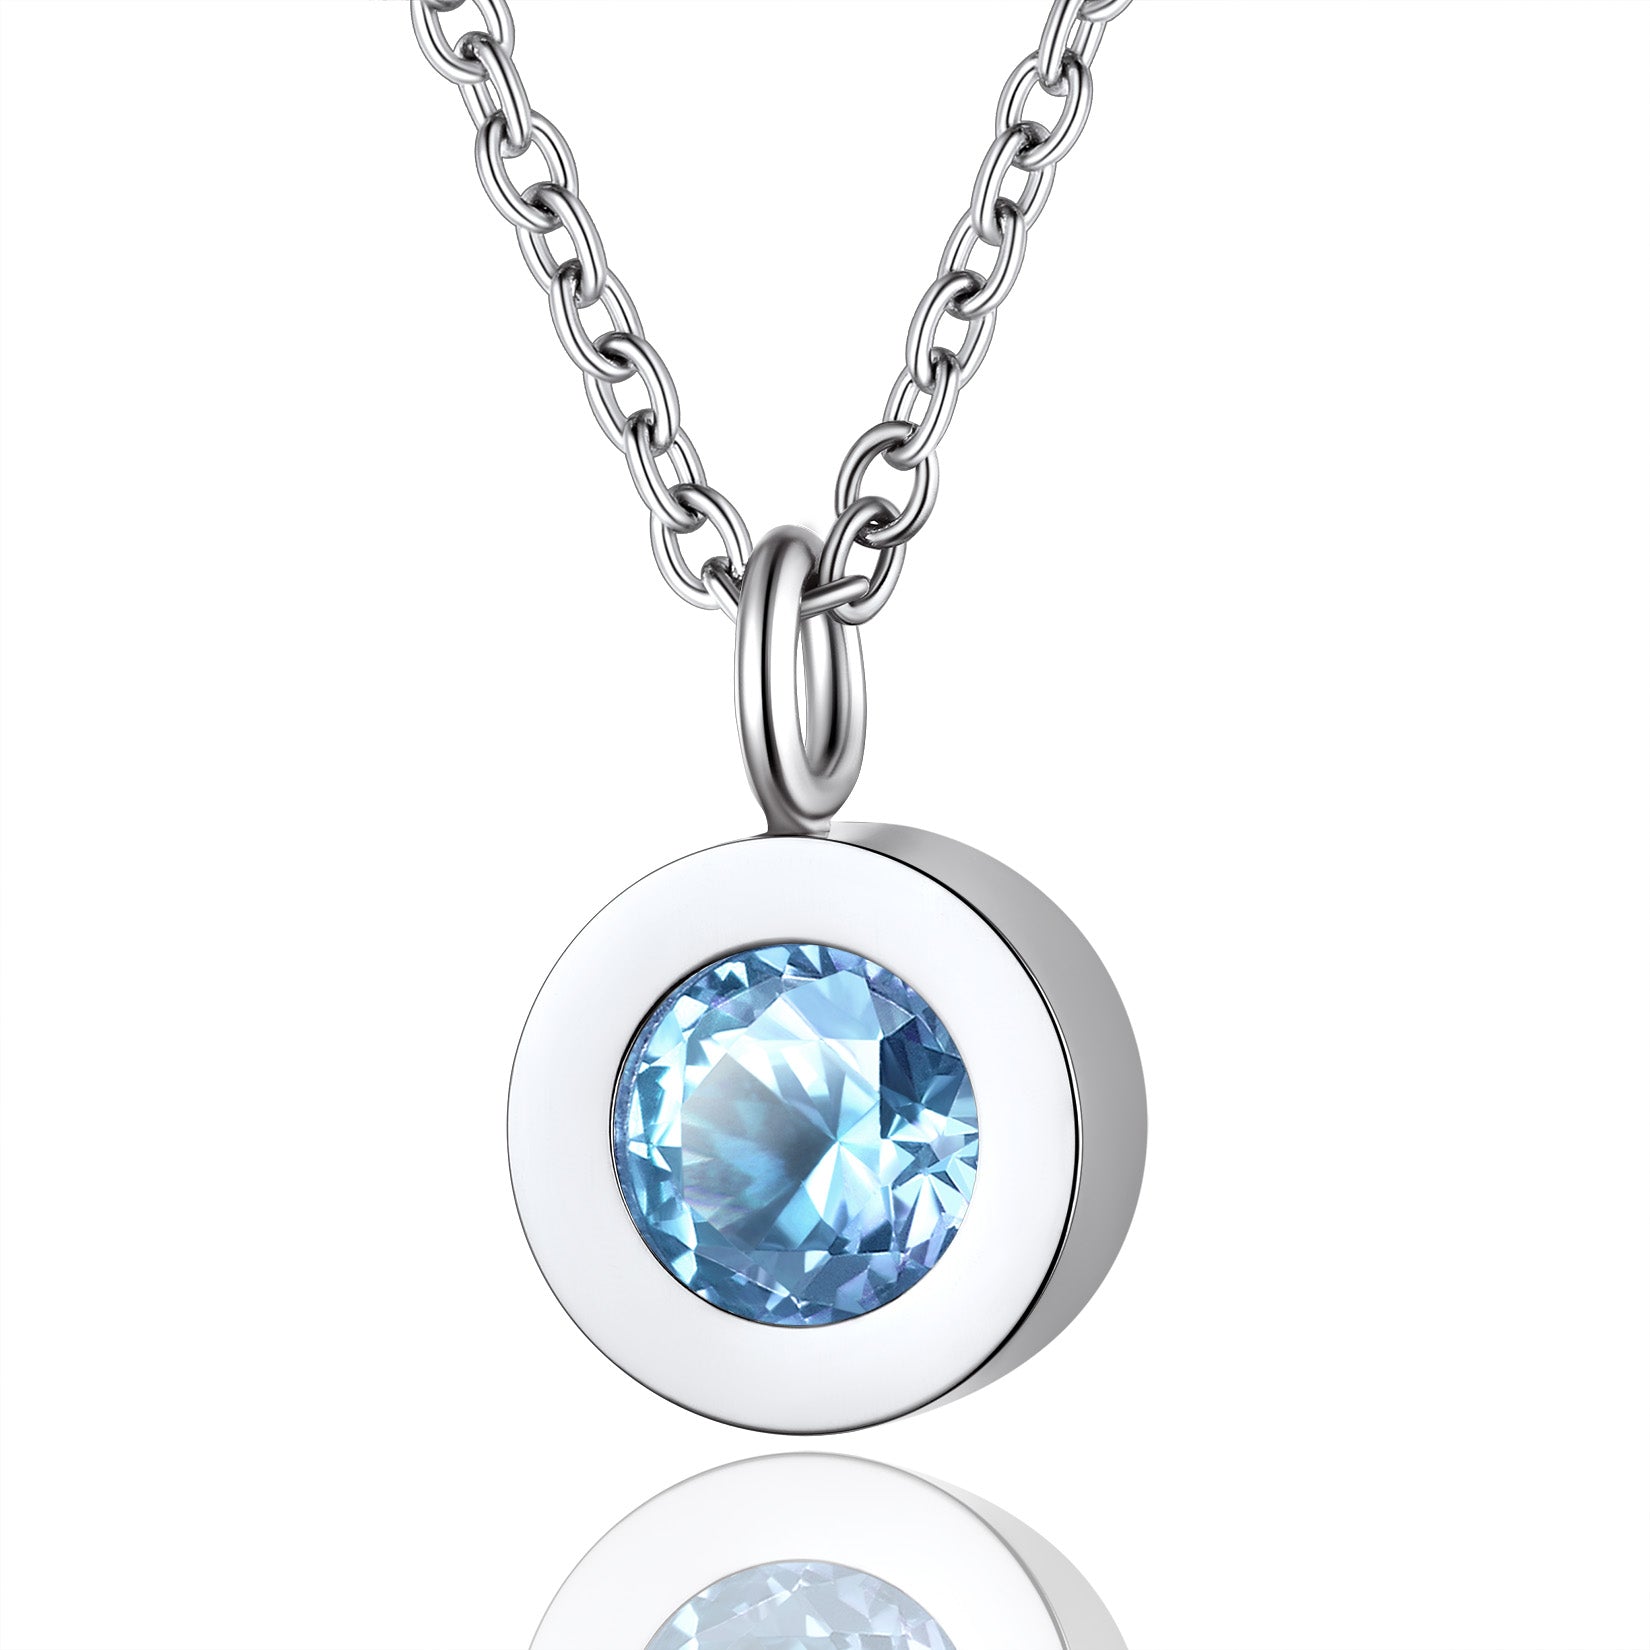 Personalized Round Cut Birthstone Necklace for Women BIRTHSTONES JEWELRY